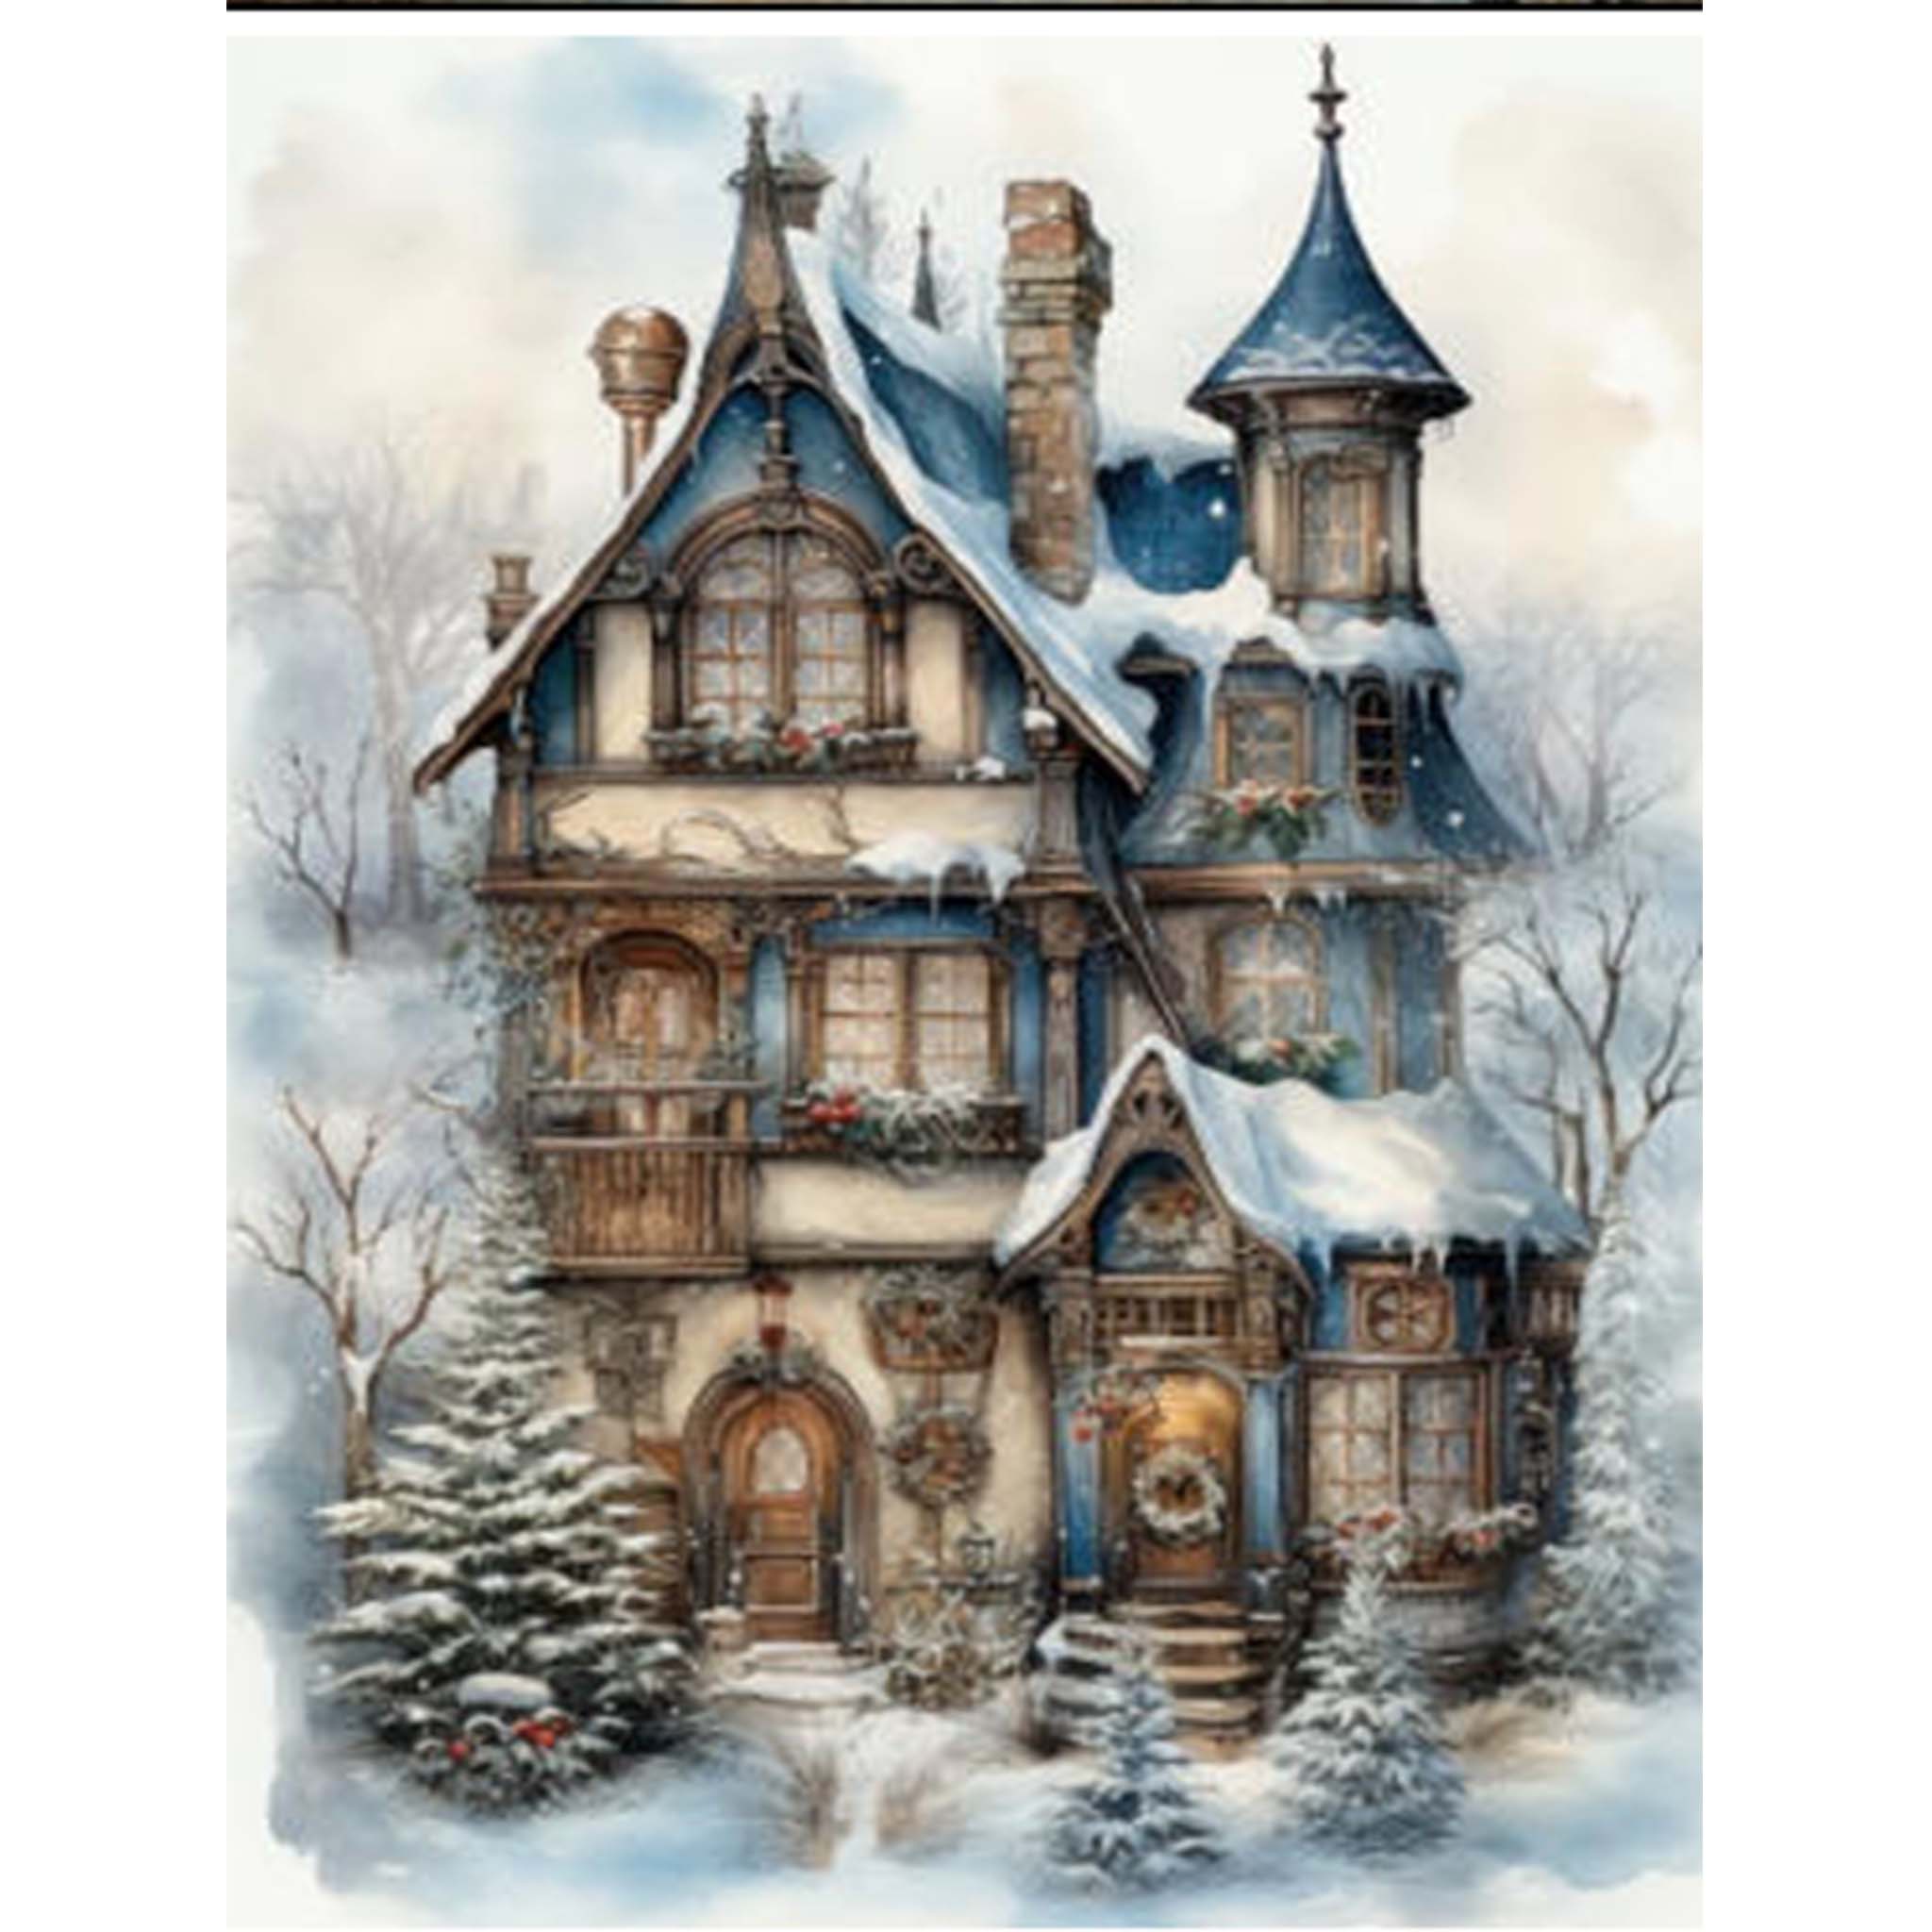 A4 Plus rice paper design featuring a Victorian house covered in snow. White borders are on the sides.